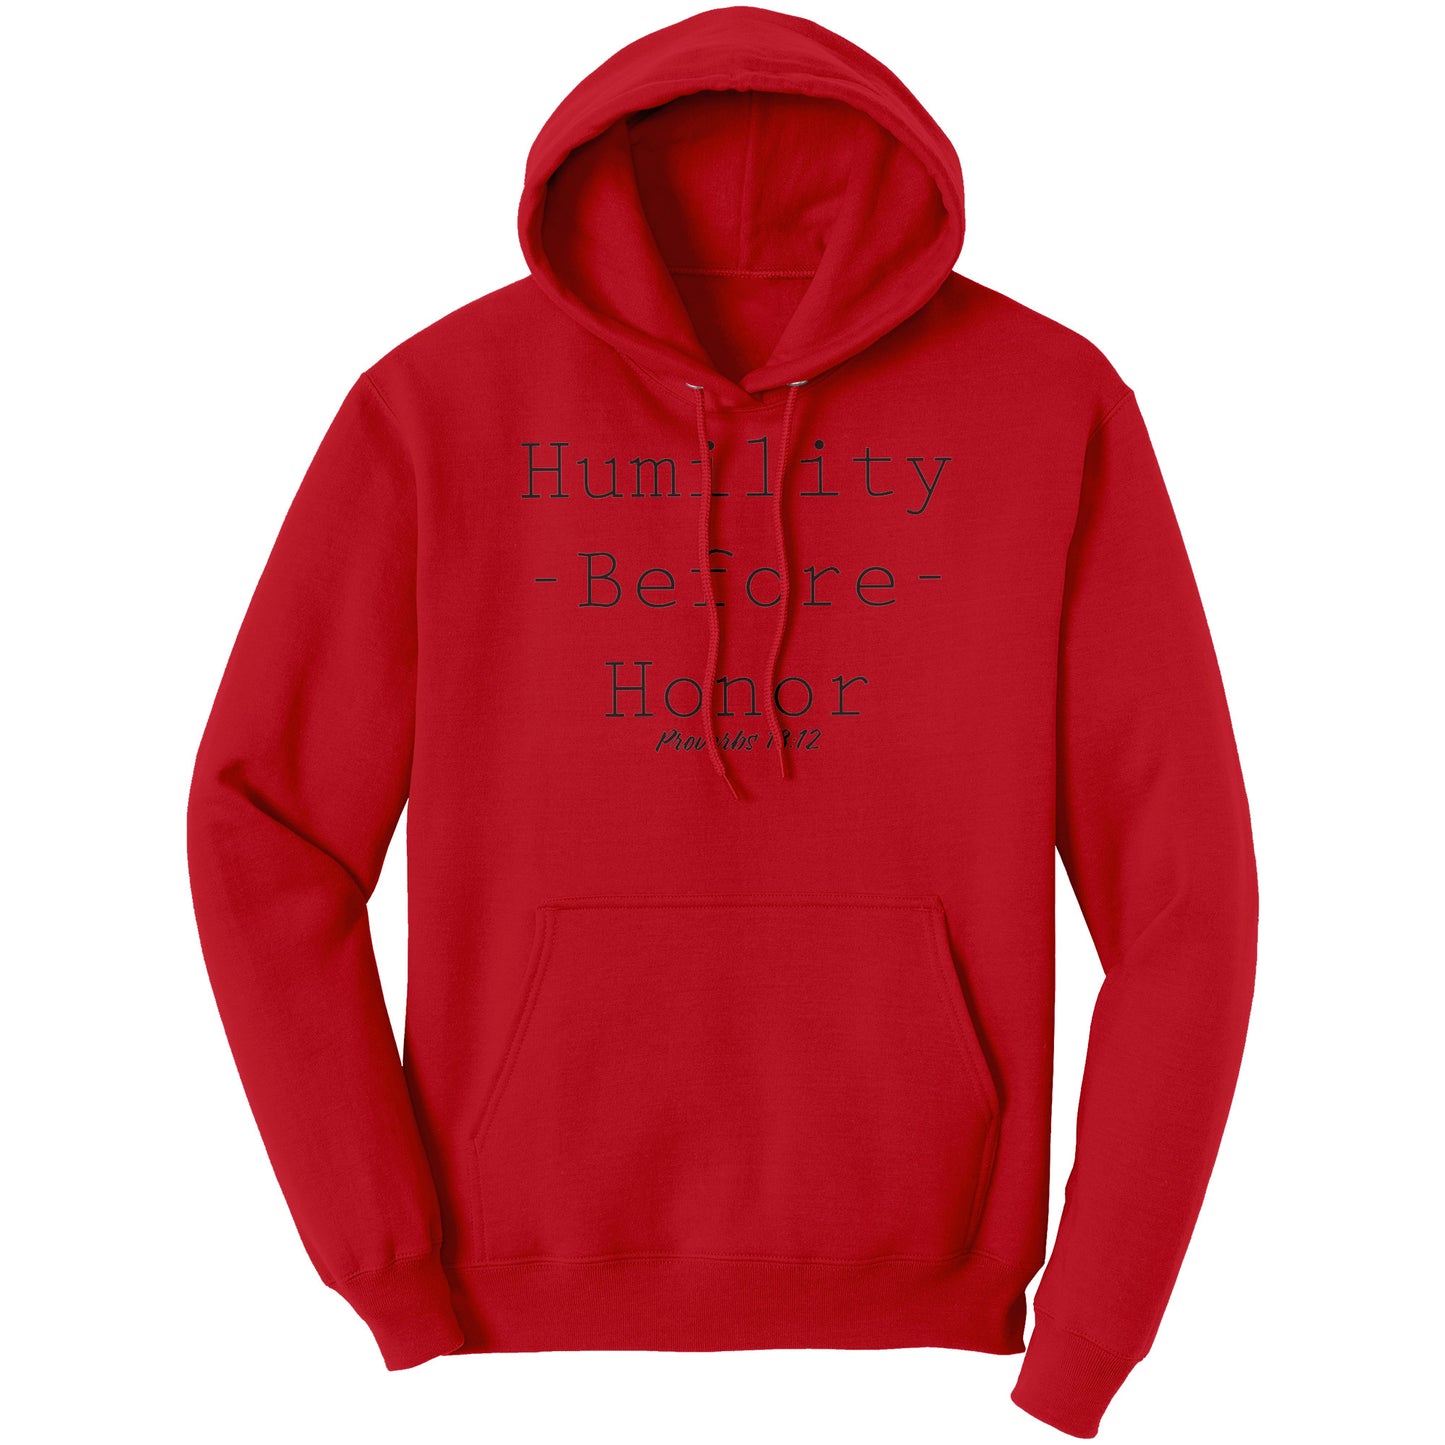 Humility Before Honor Proverbs 18:12 Hoodie Part 1